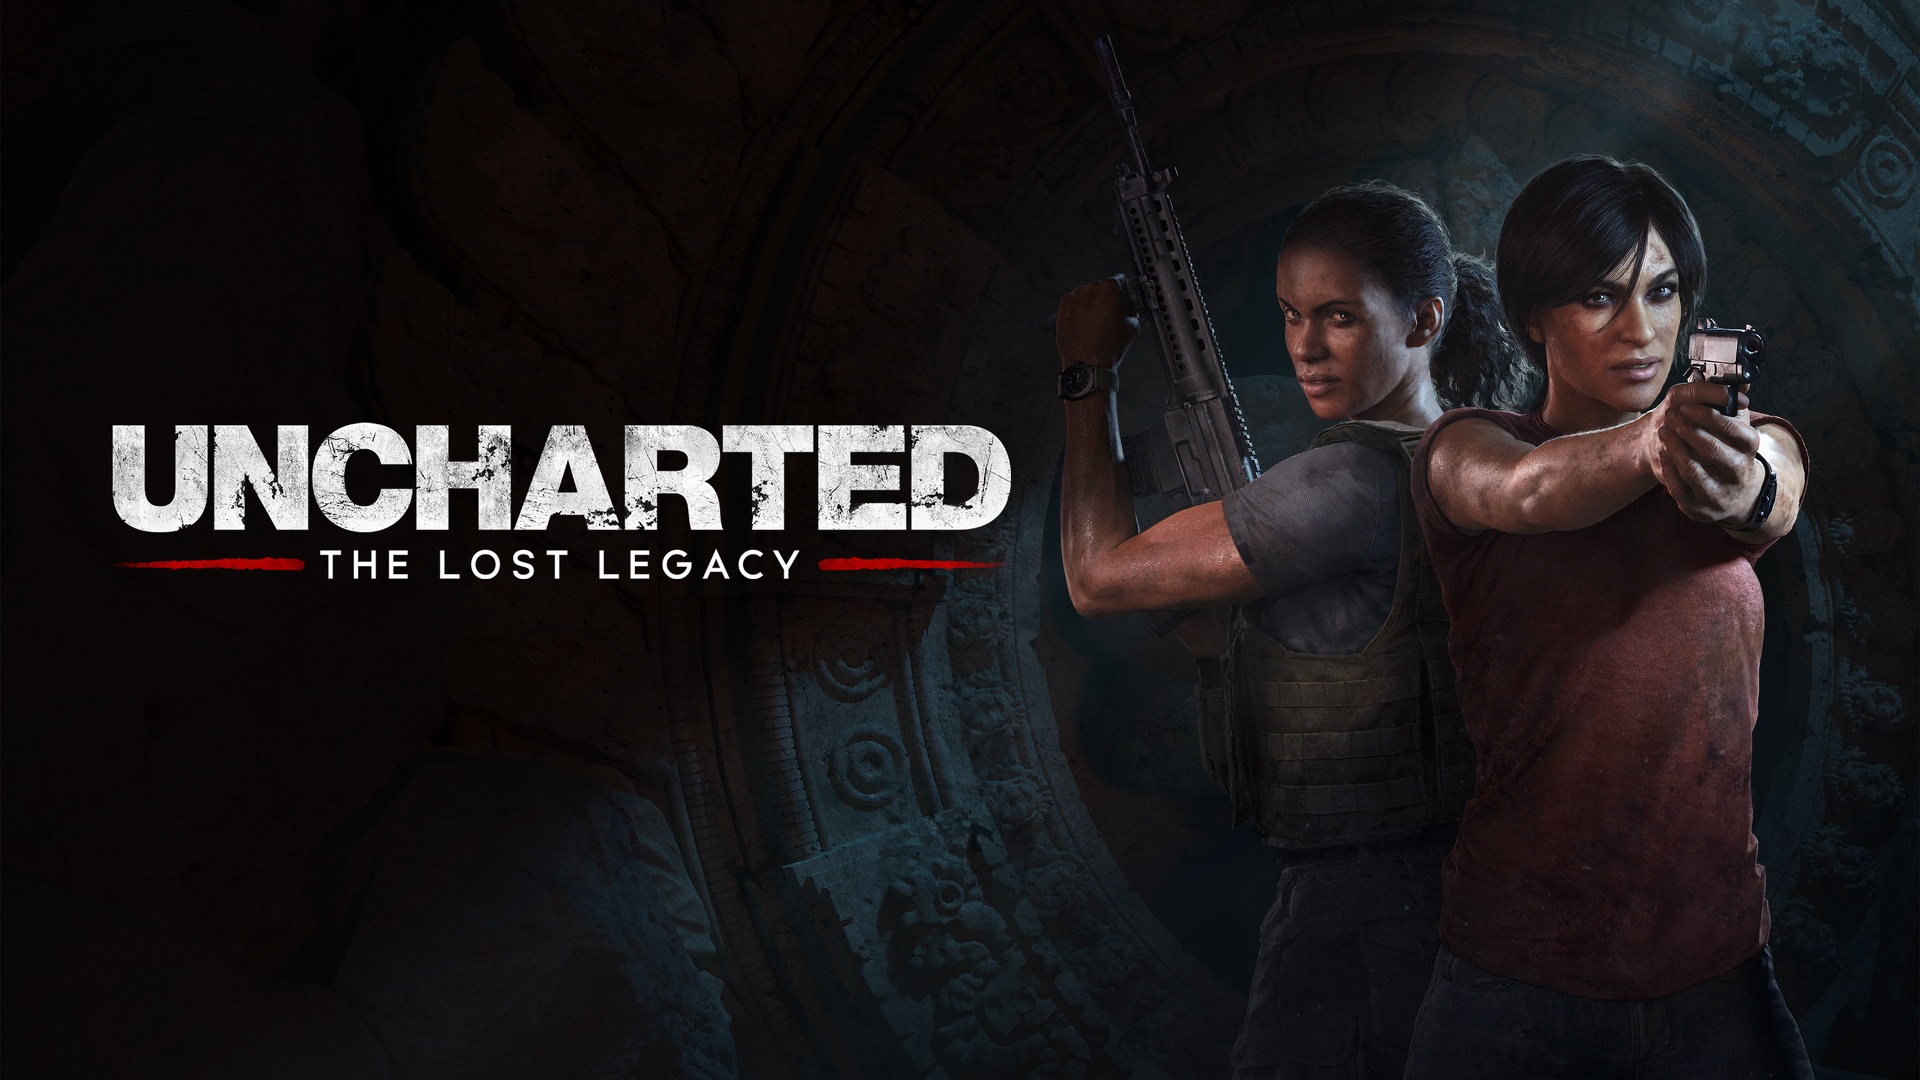 Uncharted - The Lost Legacy - Wallpaper 4K.jpg